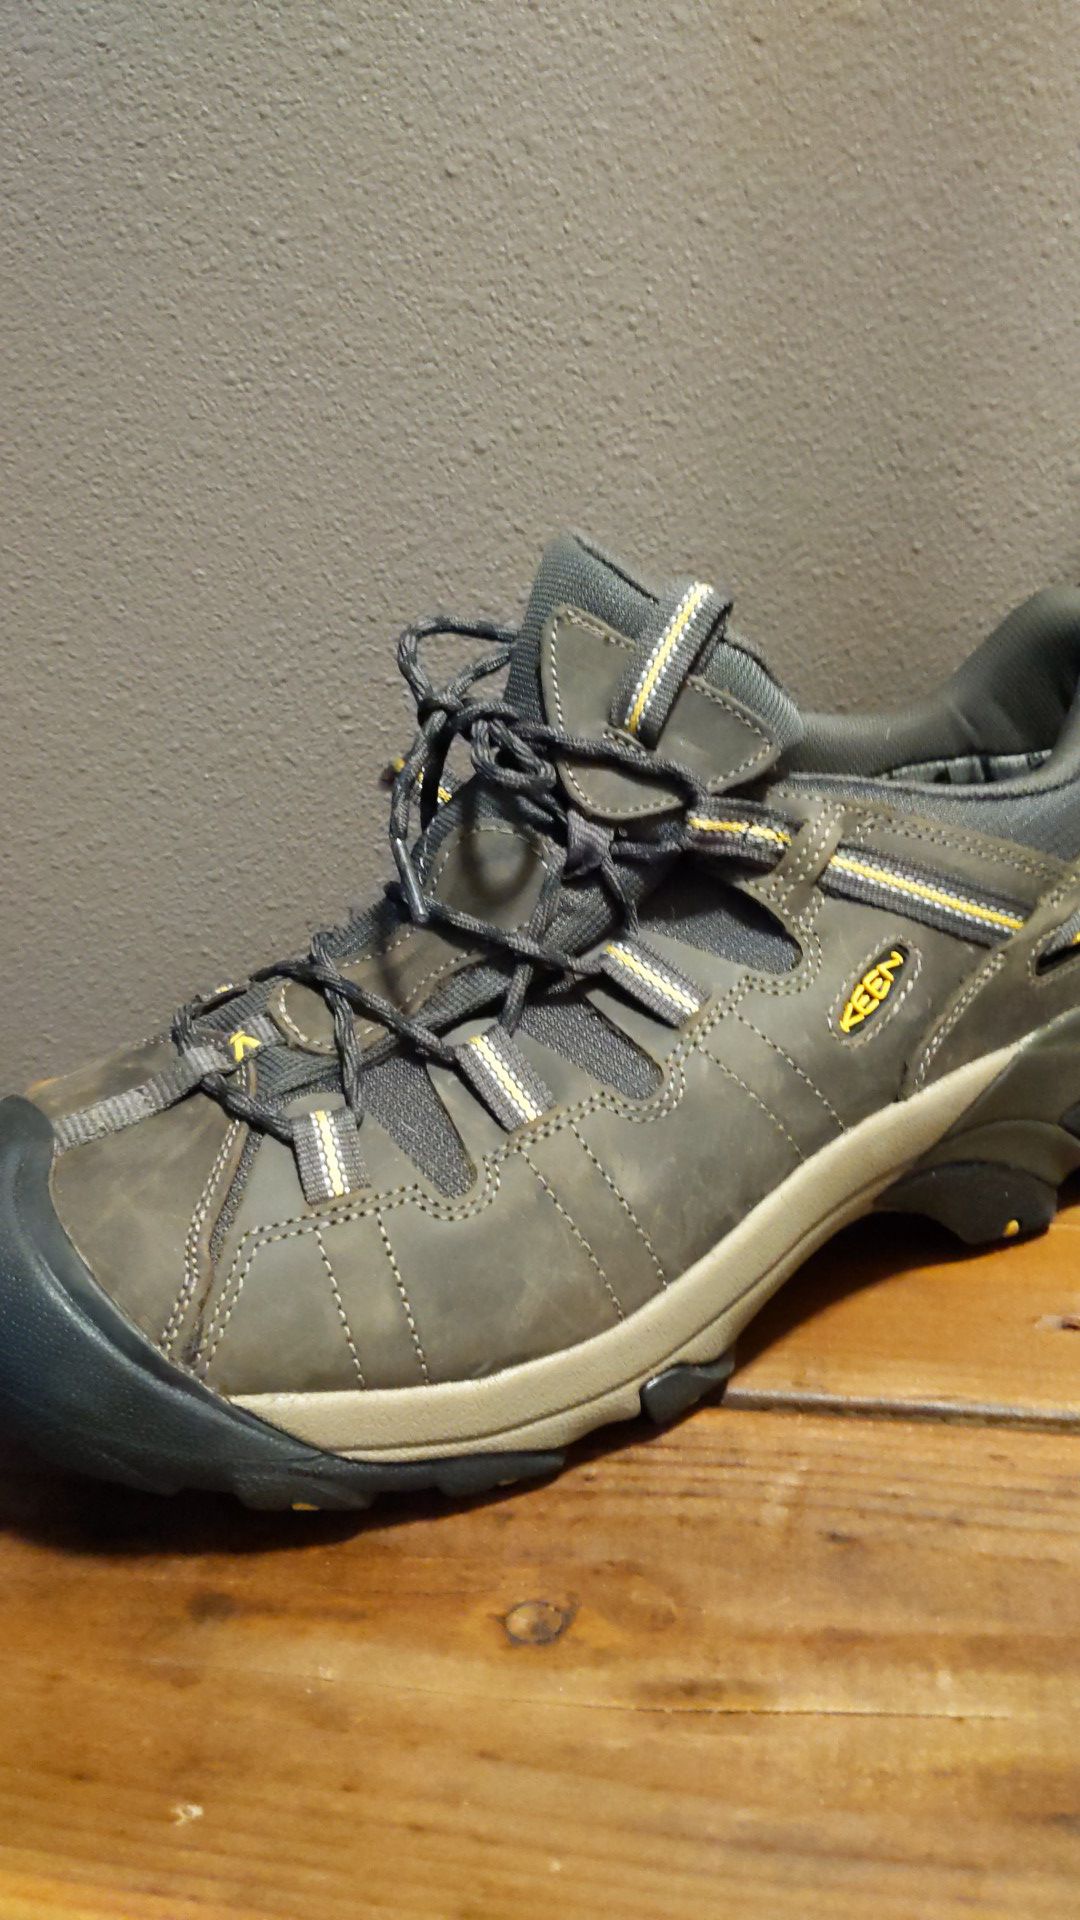 Men's size 14 Keen Hiking boots